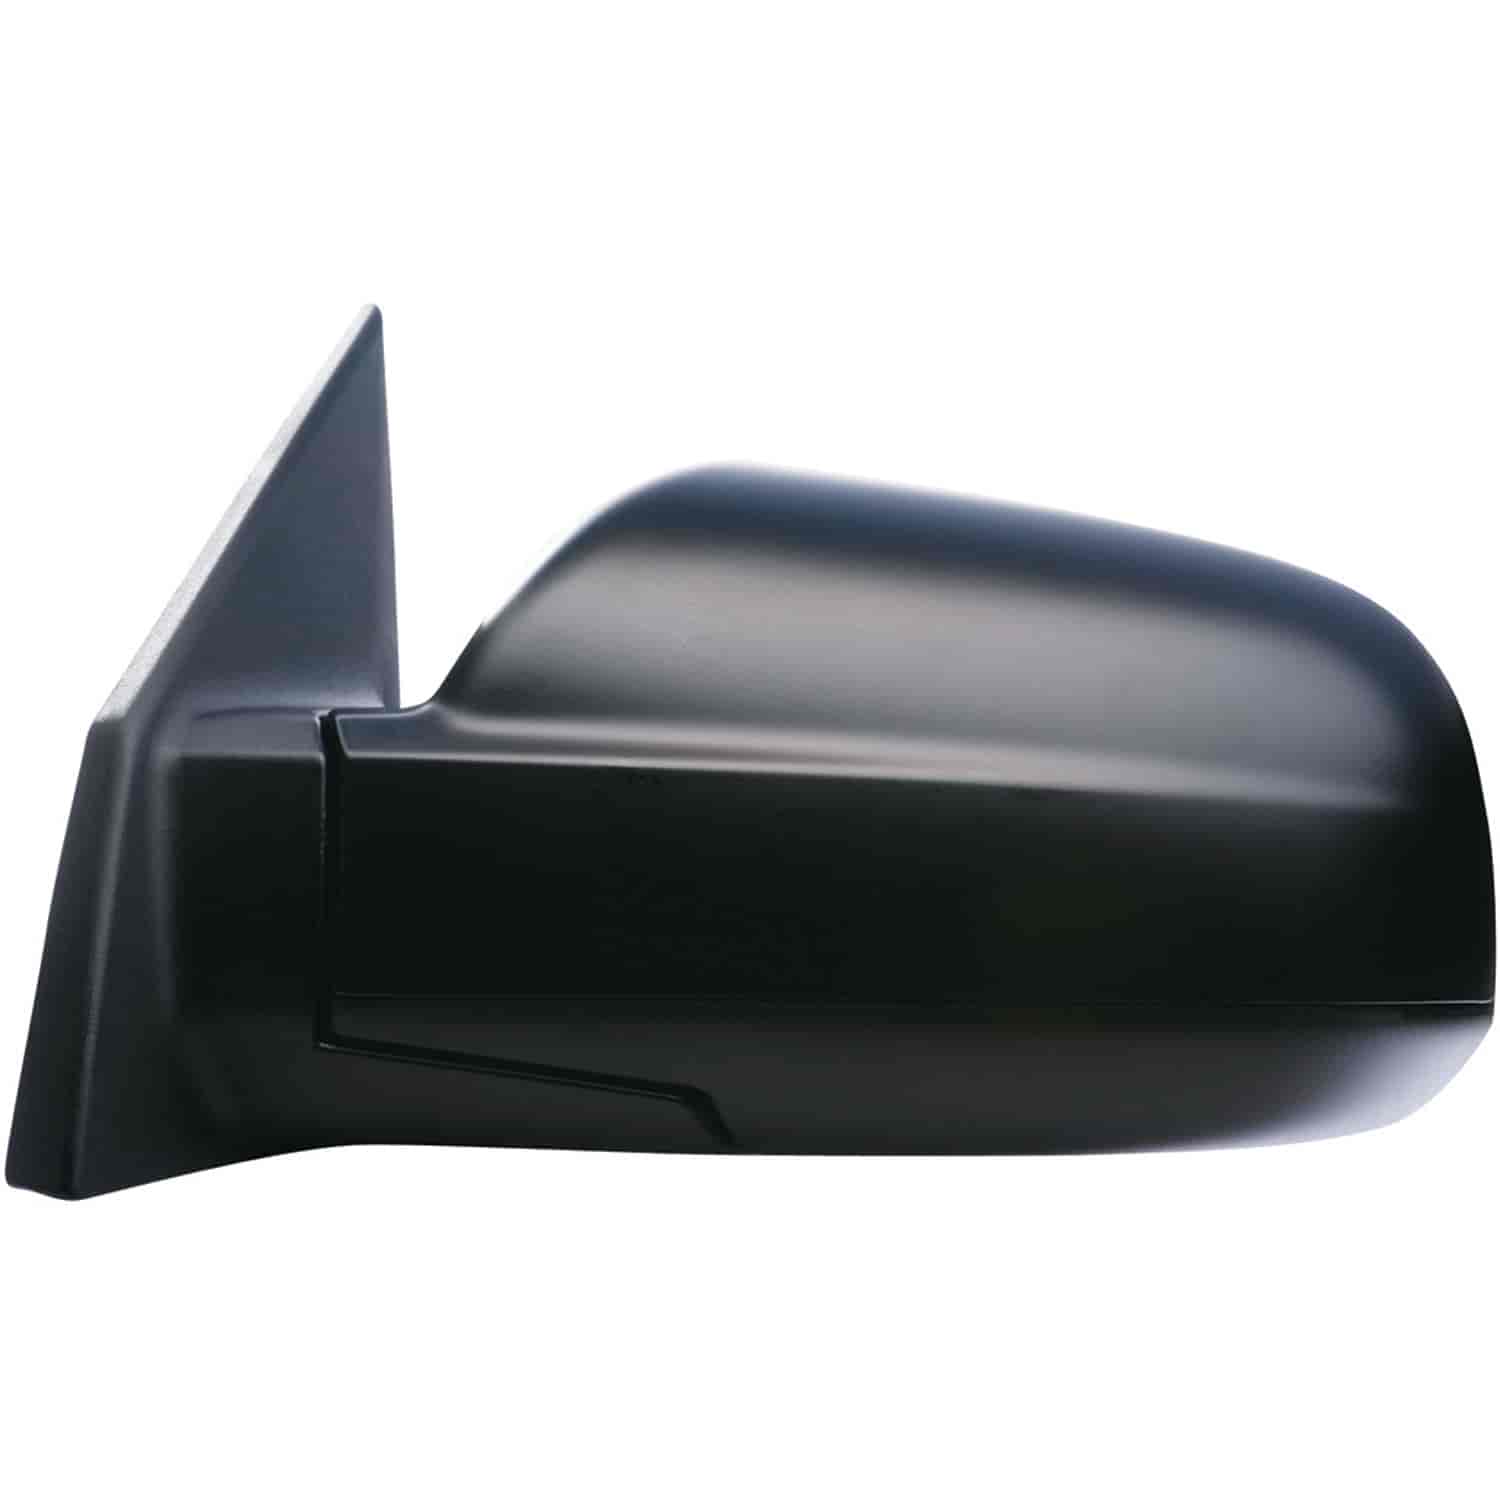 OEM Style Replacement mirror for 05-10 Hyundai Tucson driver side mirror tested to fit and function